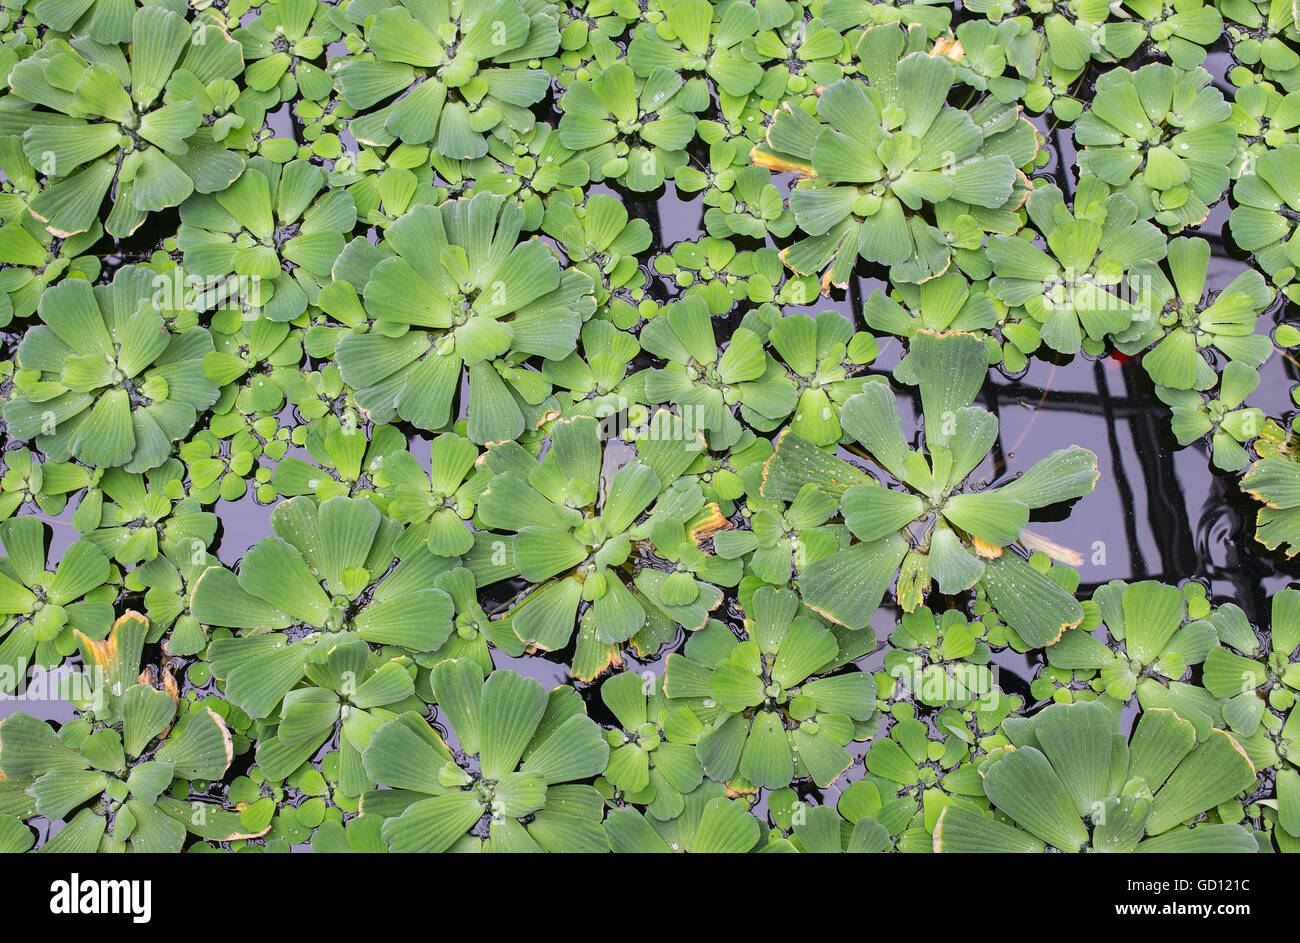 Green floating water lettuce/ cabbage (Pistia stratiotes). Background. Stock Photo